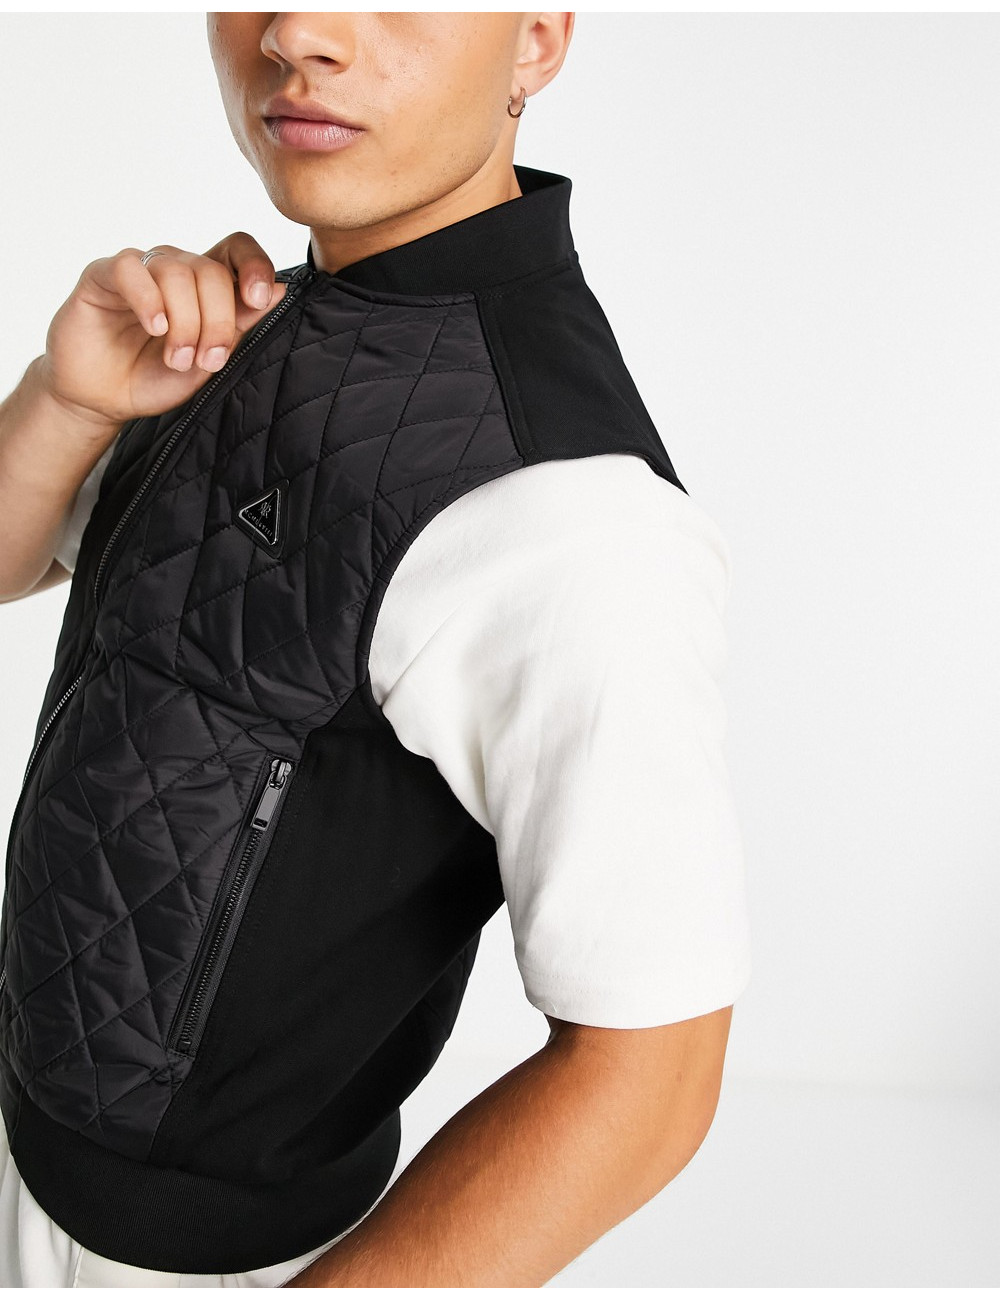 River Island quilted gilet...